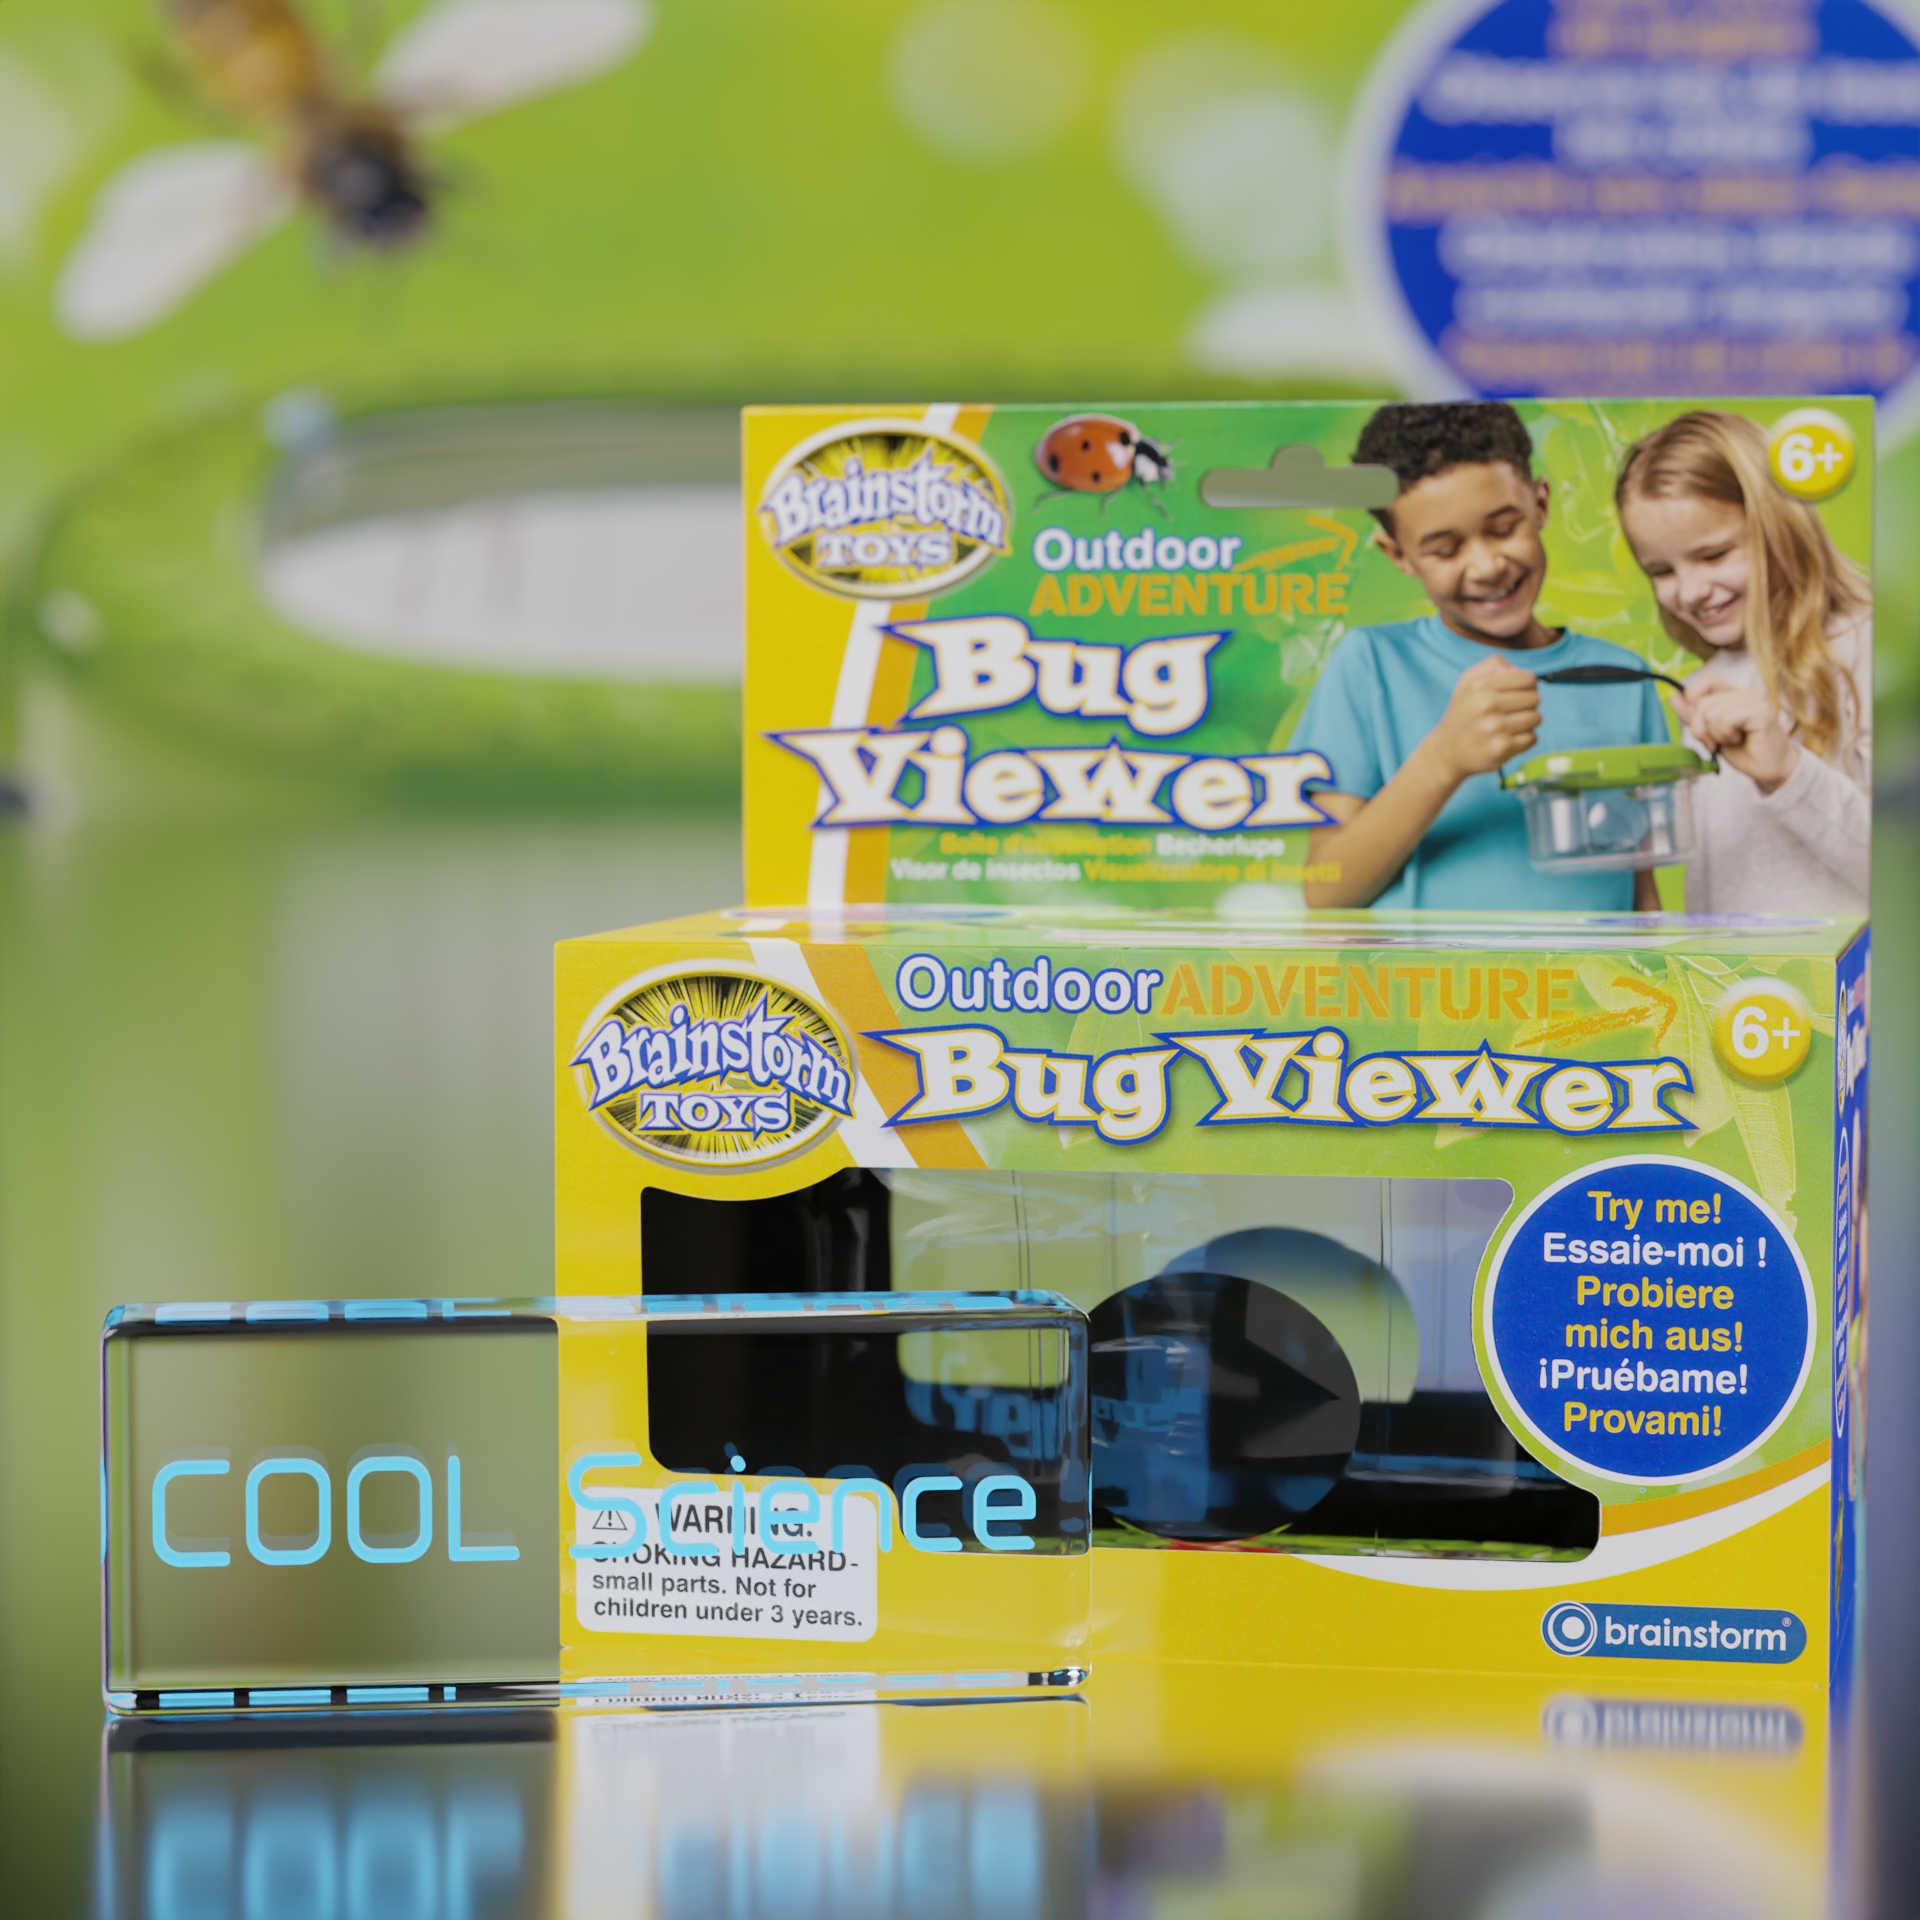 Front View of the Brainstorm Outdoor Adventure Bug Viewer box